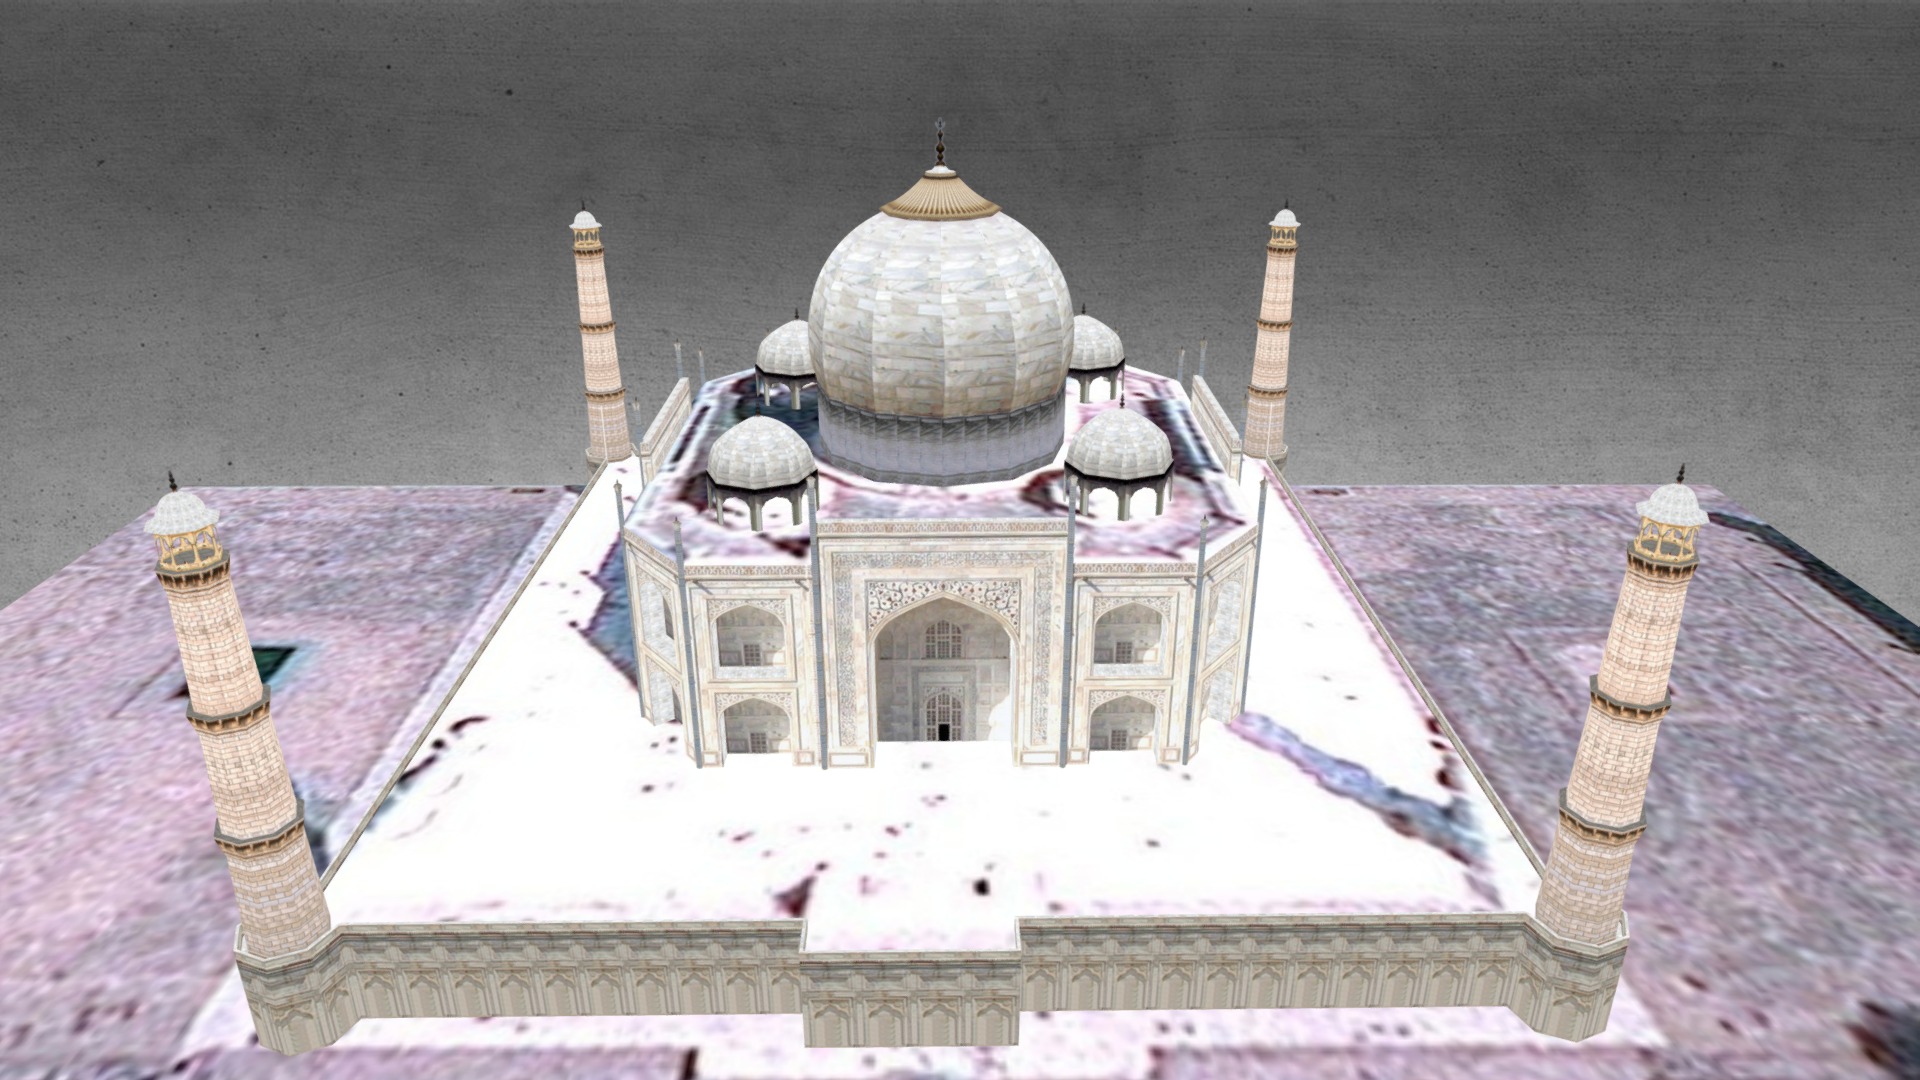 3D model Taj Mahal - This is a 3D model of the Taj Mahal. The 3D model is about a building with a domed roof.